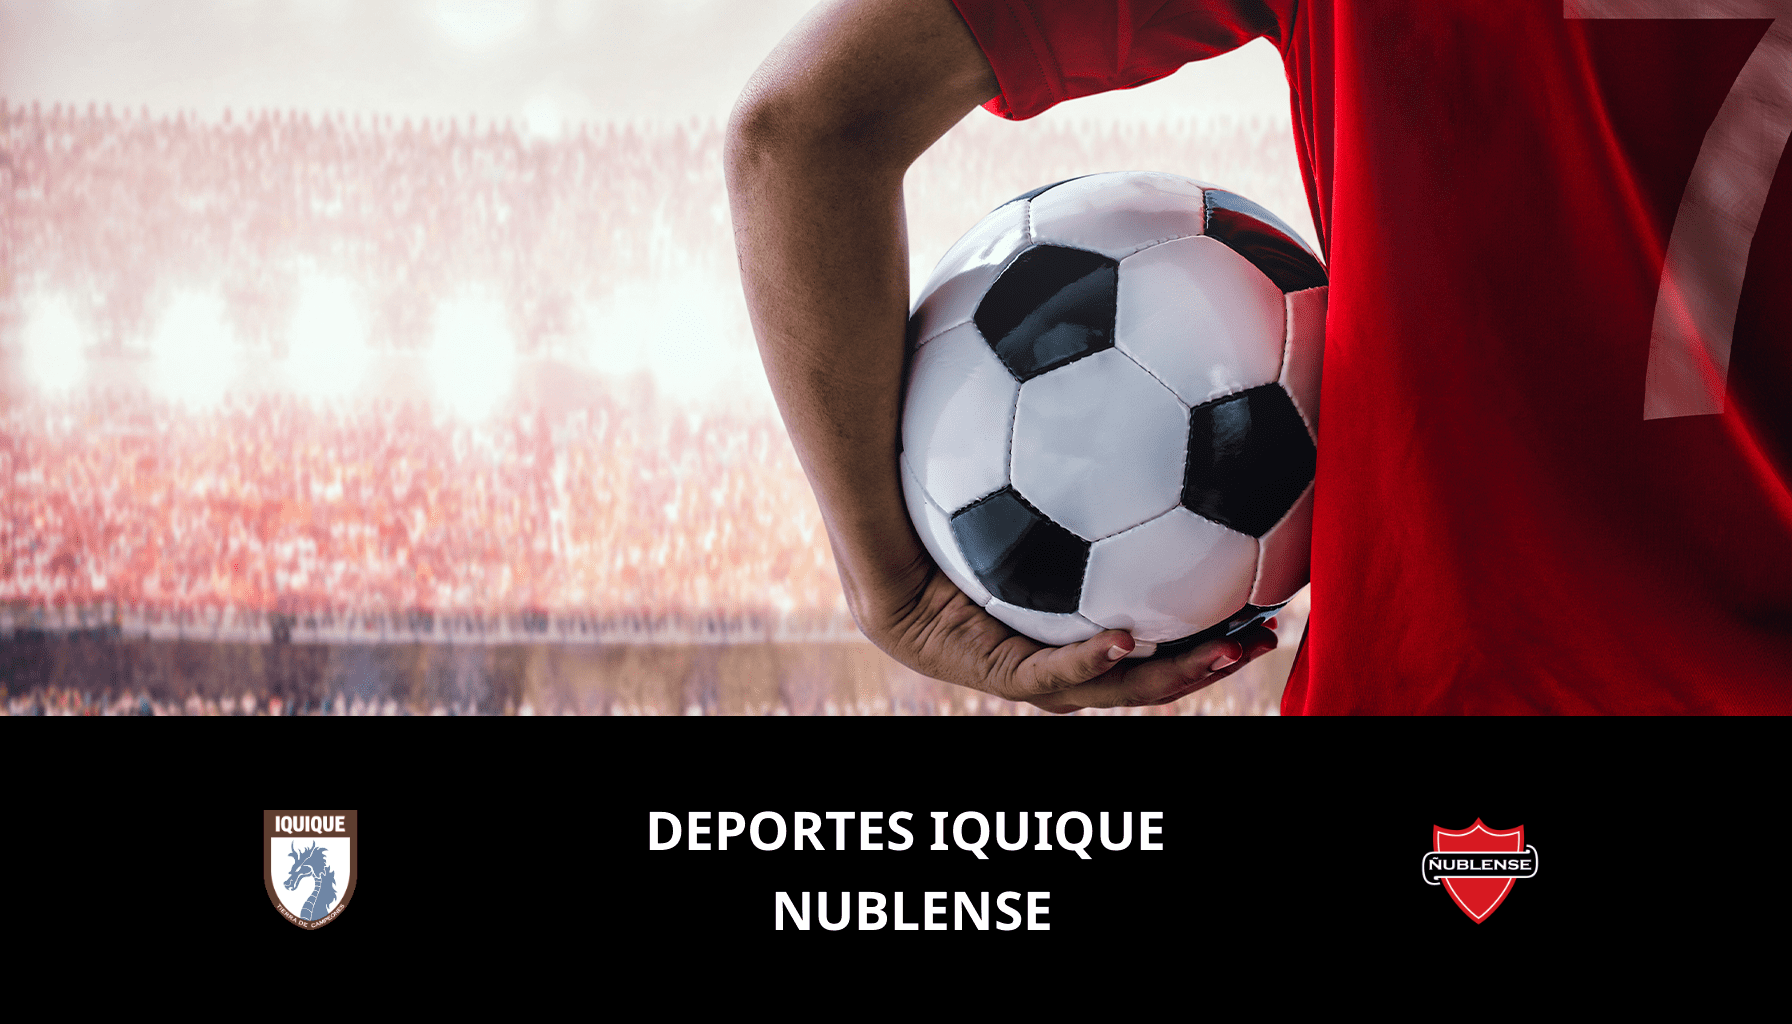 Previsione per Deportes Iquique VS Nublense il 13/05/2024 Analysis of the match